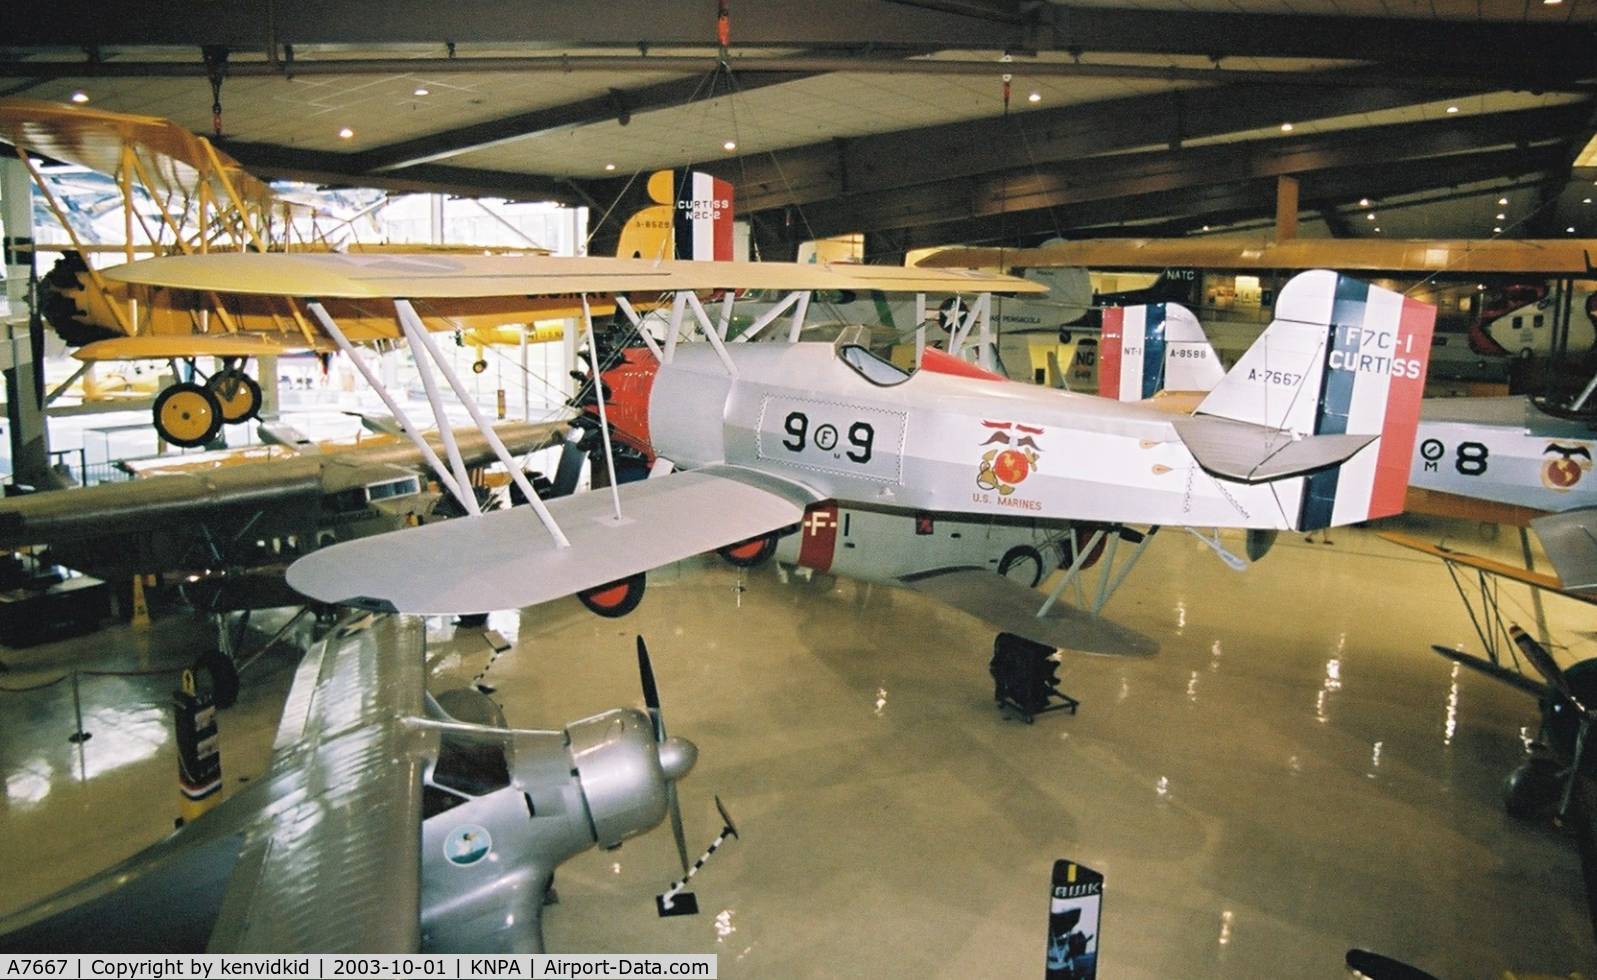 A7667, 1928 Curtiss F7C-1 C/N Not found A-7667, On display at the Museum of Naval Aviation, Pensacola.